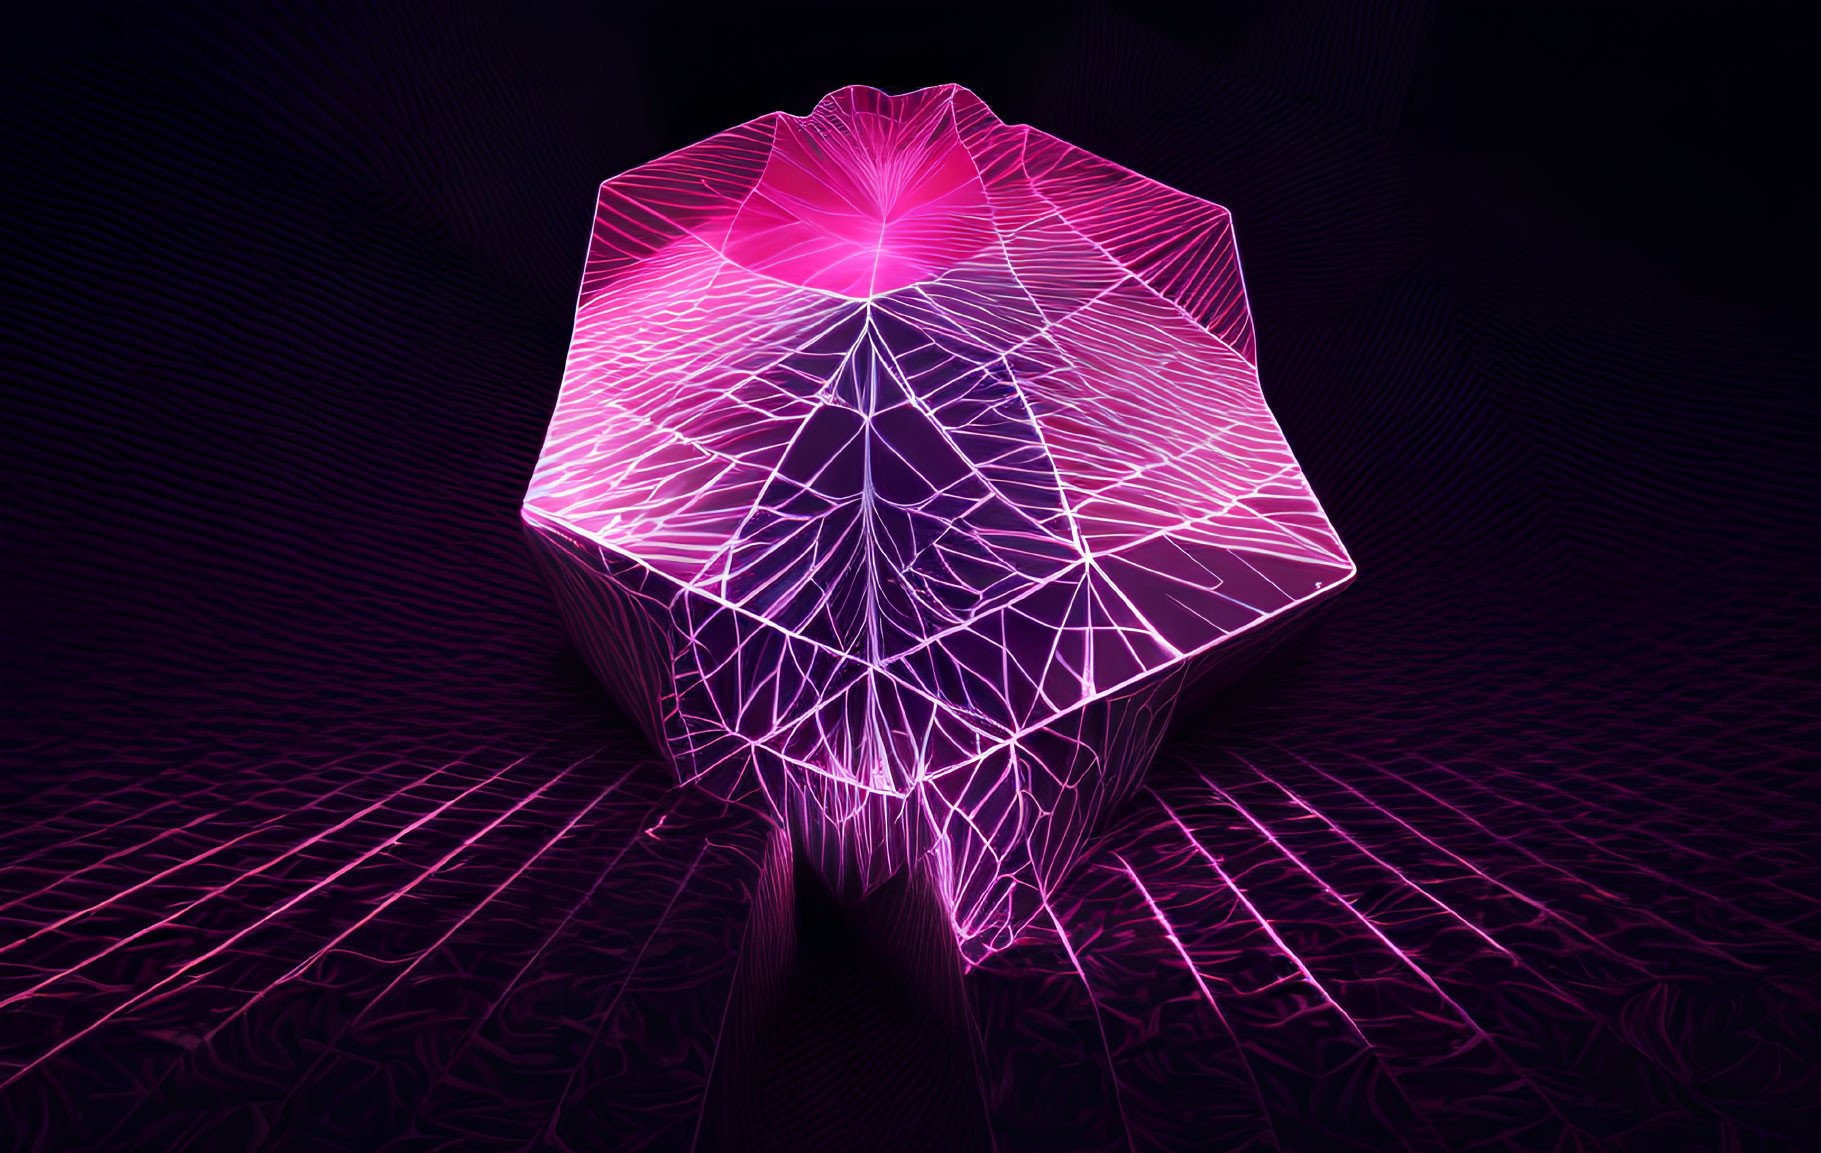 Neon pink and white 3D digital art of geometric mountain on grid